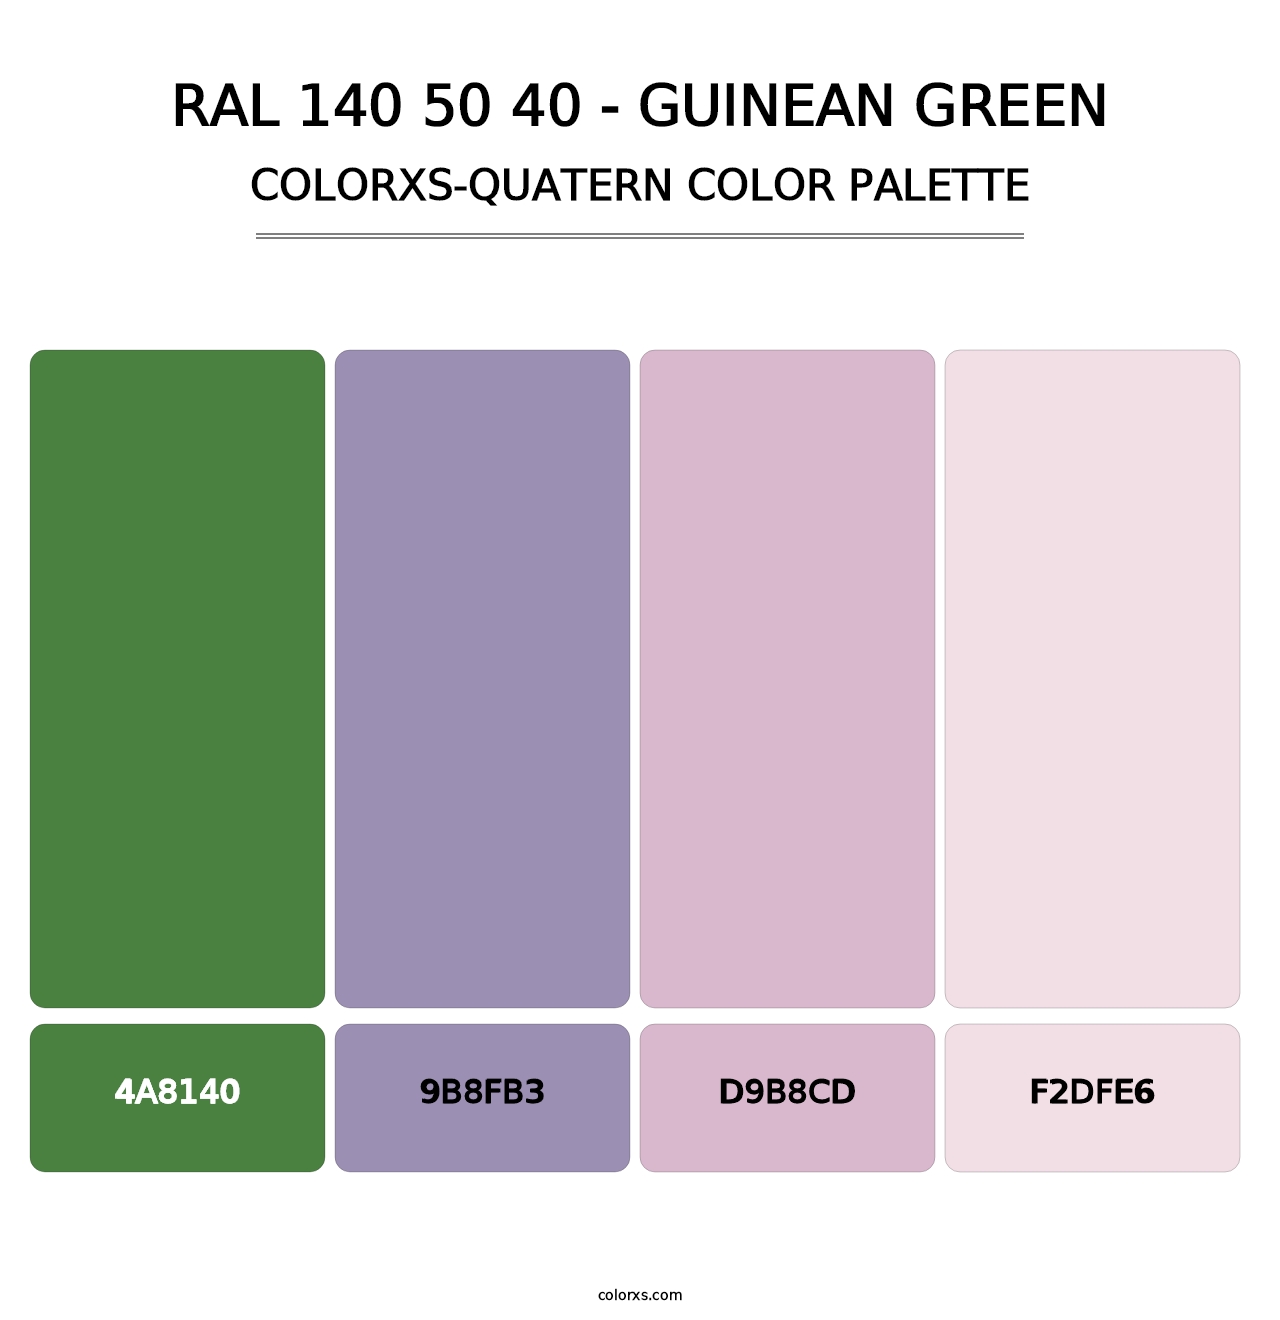 RAL 140 50 40 - Guinean Green - Colorxs Quatern Palette